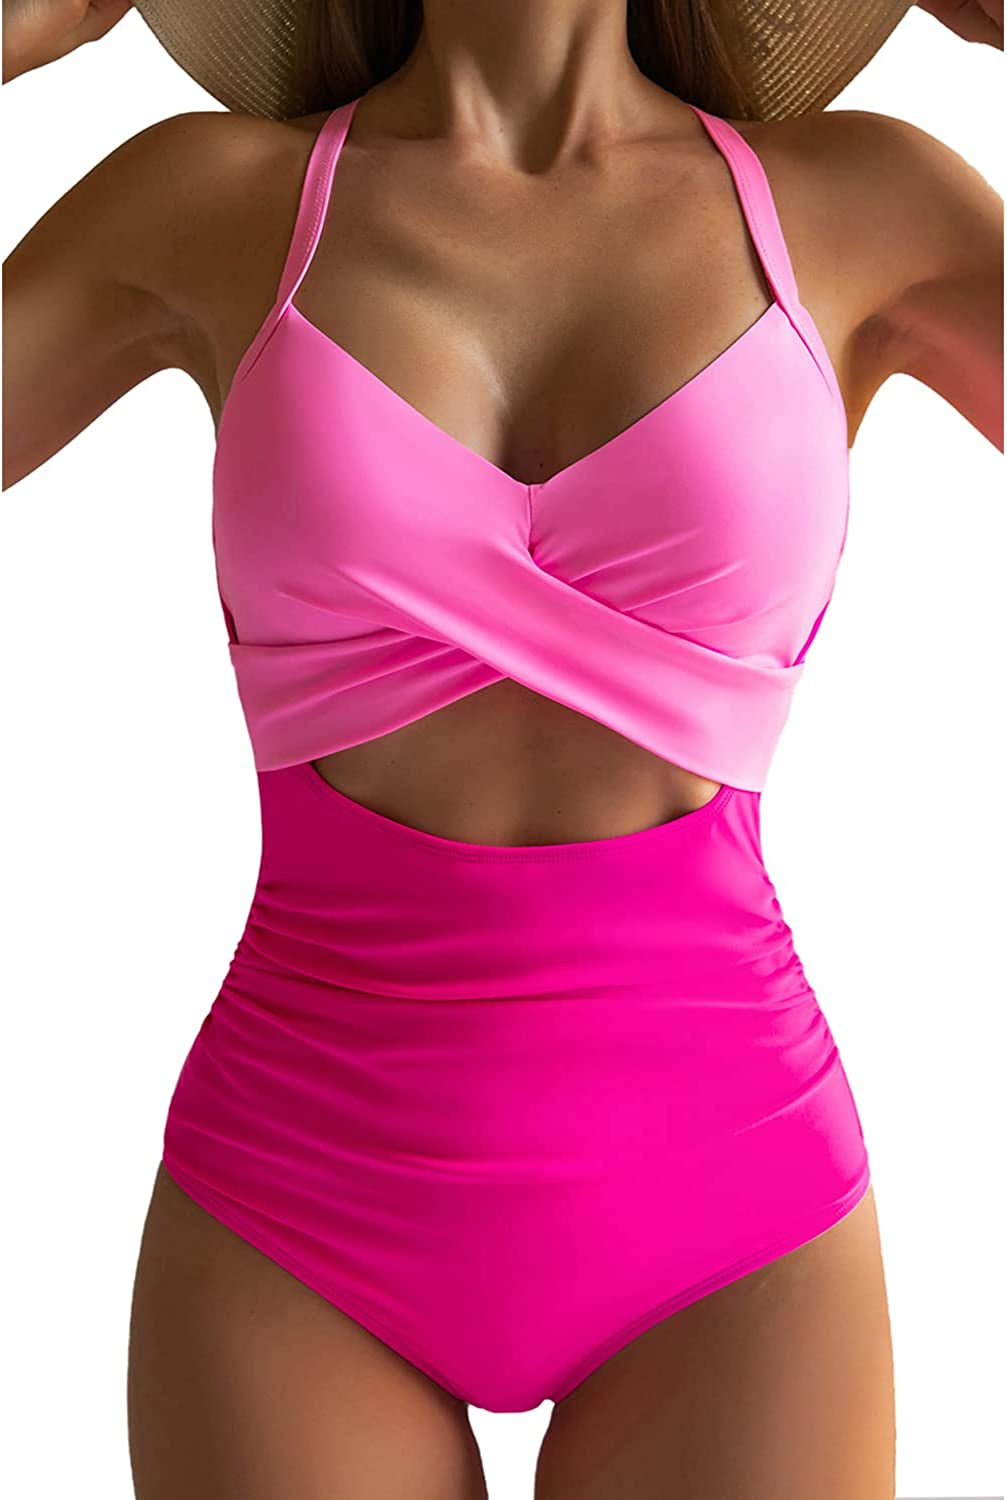 Eomenie Women's Ruched Tummy Control One Piece Swimsuit